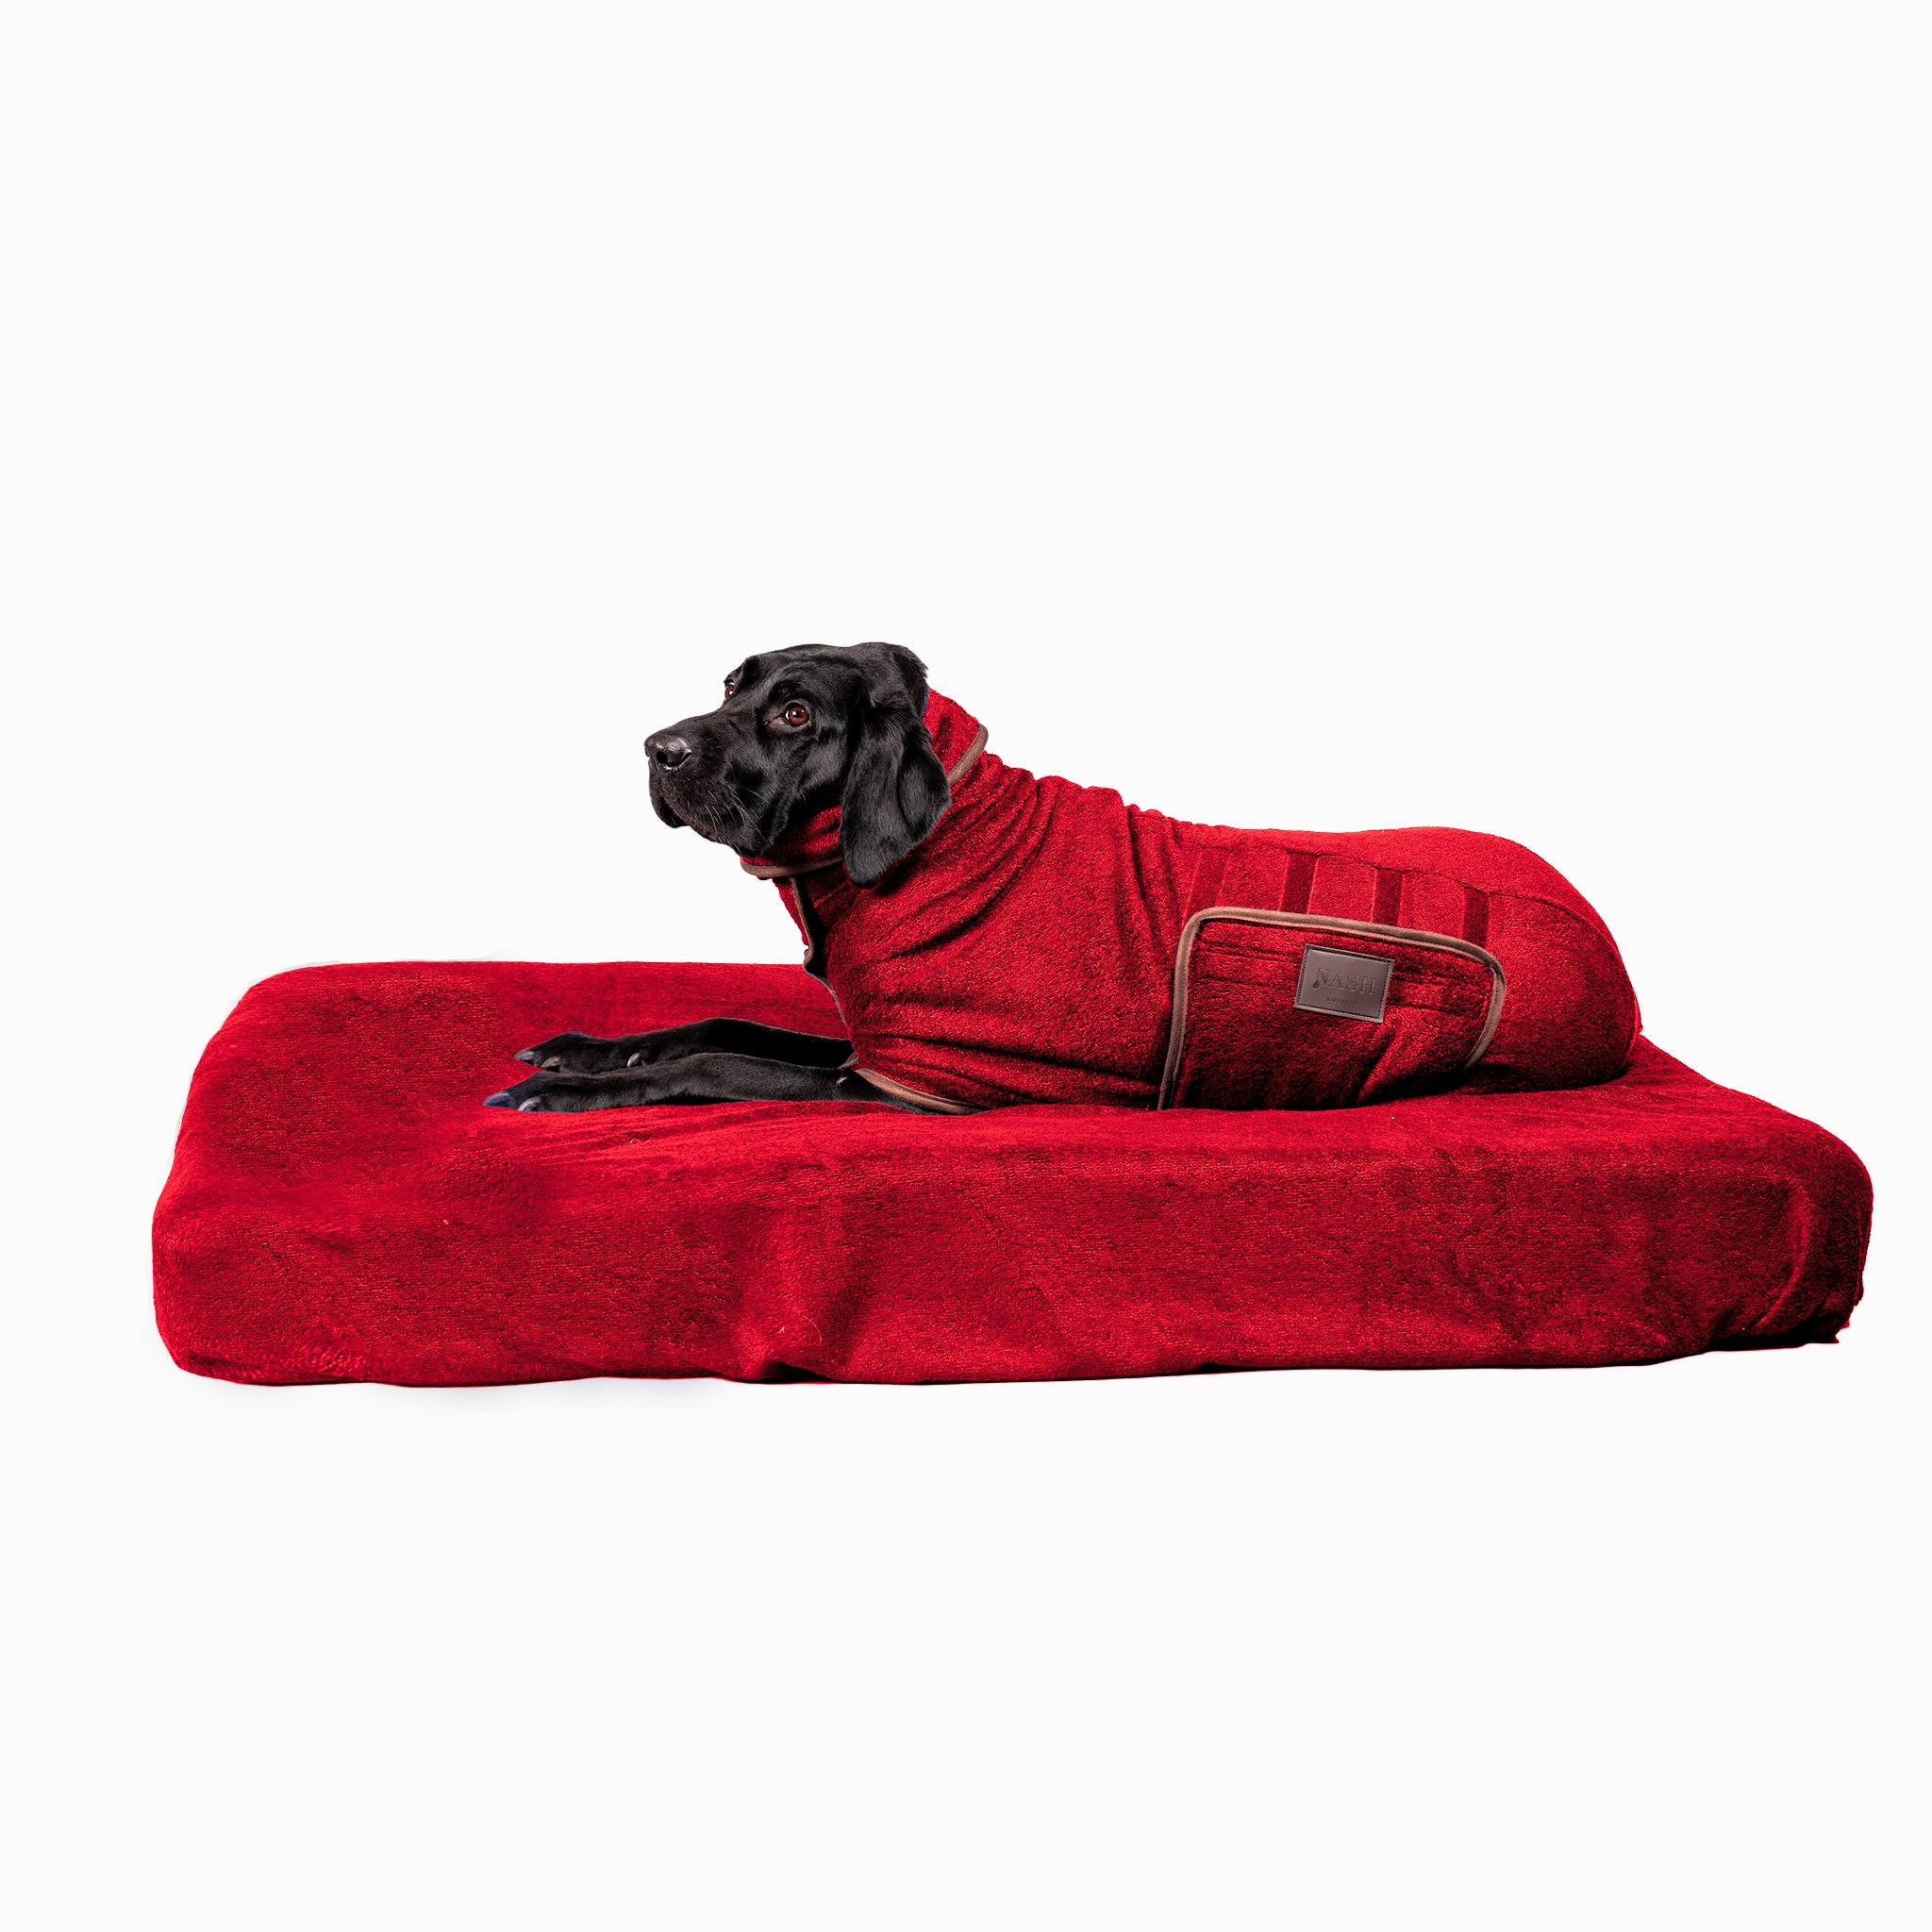 Black Labrador resting on a red NASH dog bed cover & bed, wearing the matching bamboo dog drying coat.